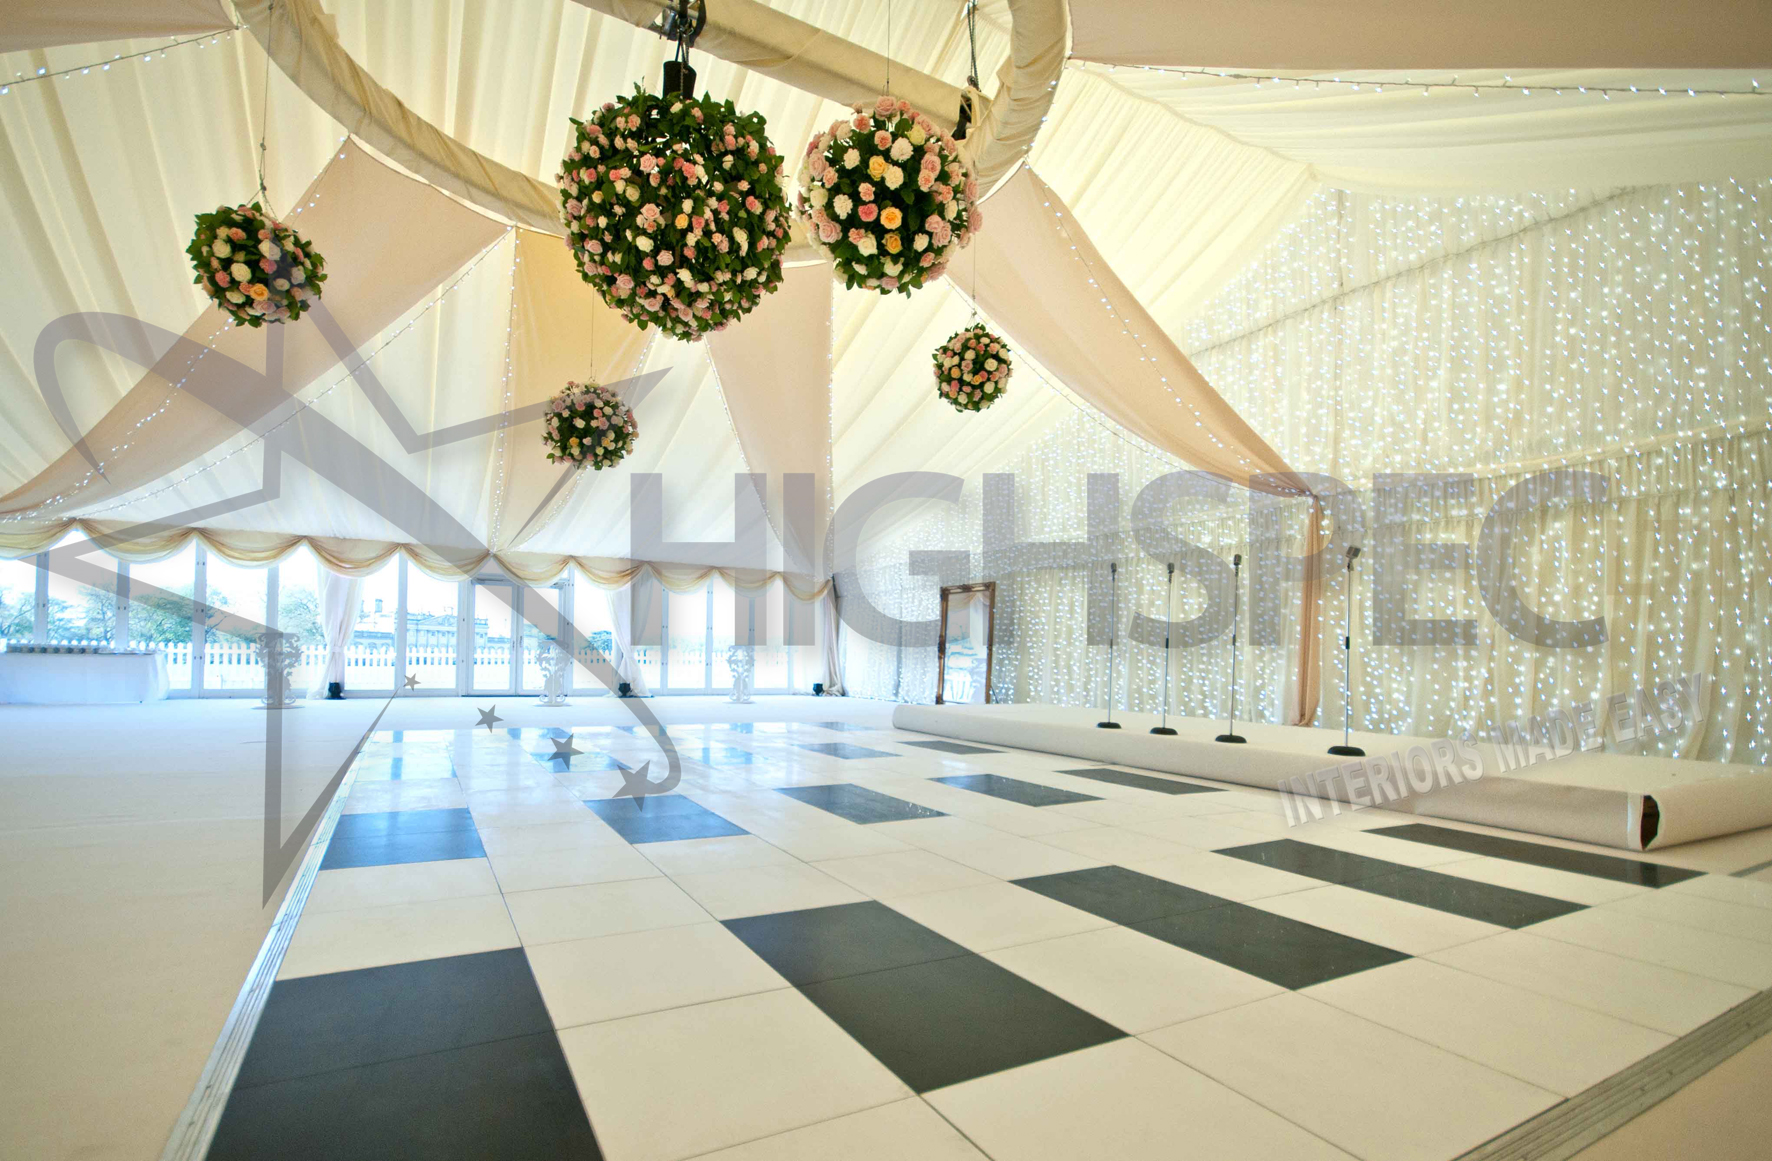 Pleated marquee lining decor